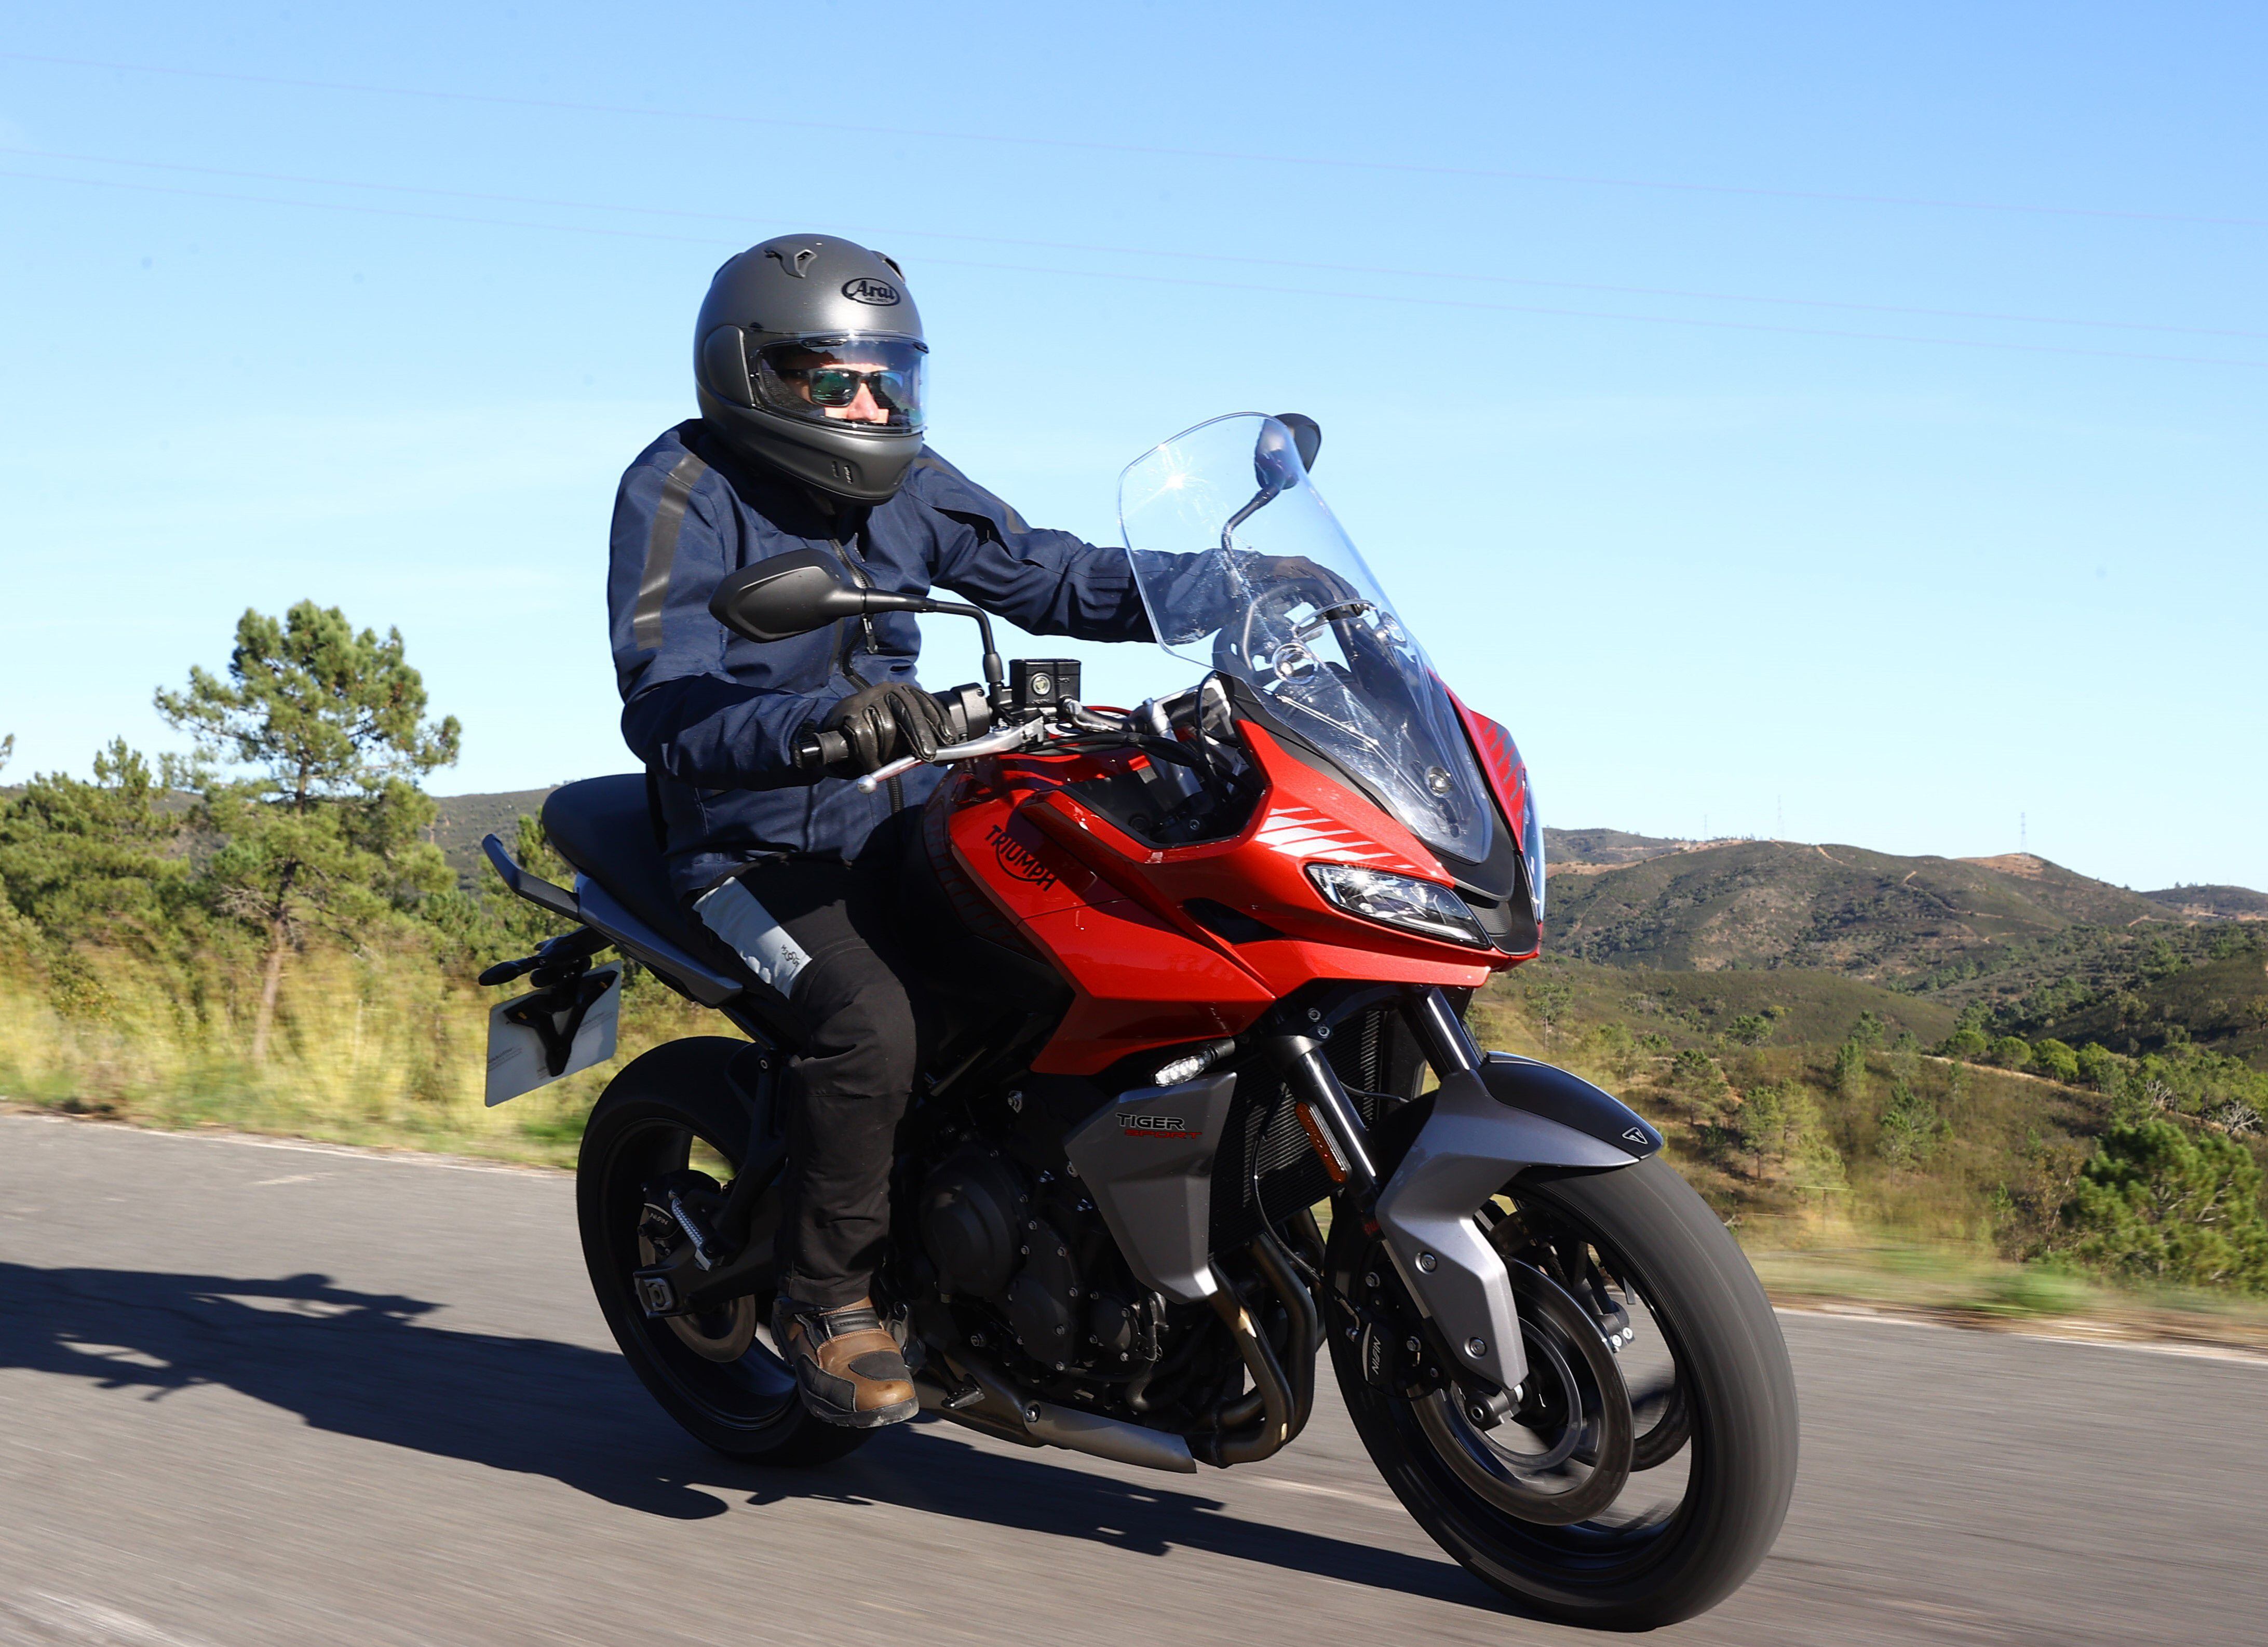 The new Tiger Sport 660 is the latest model built around Triumph's 660cc inline-triple engine.